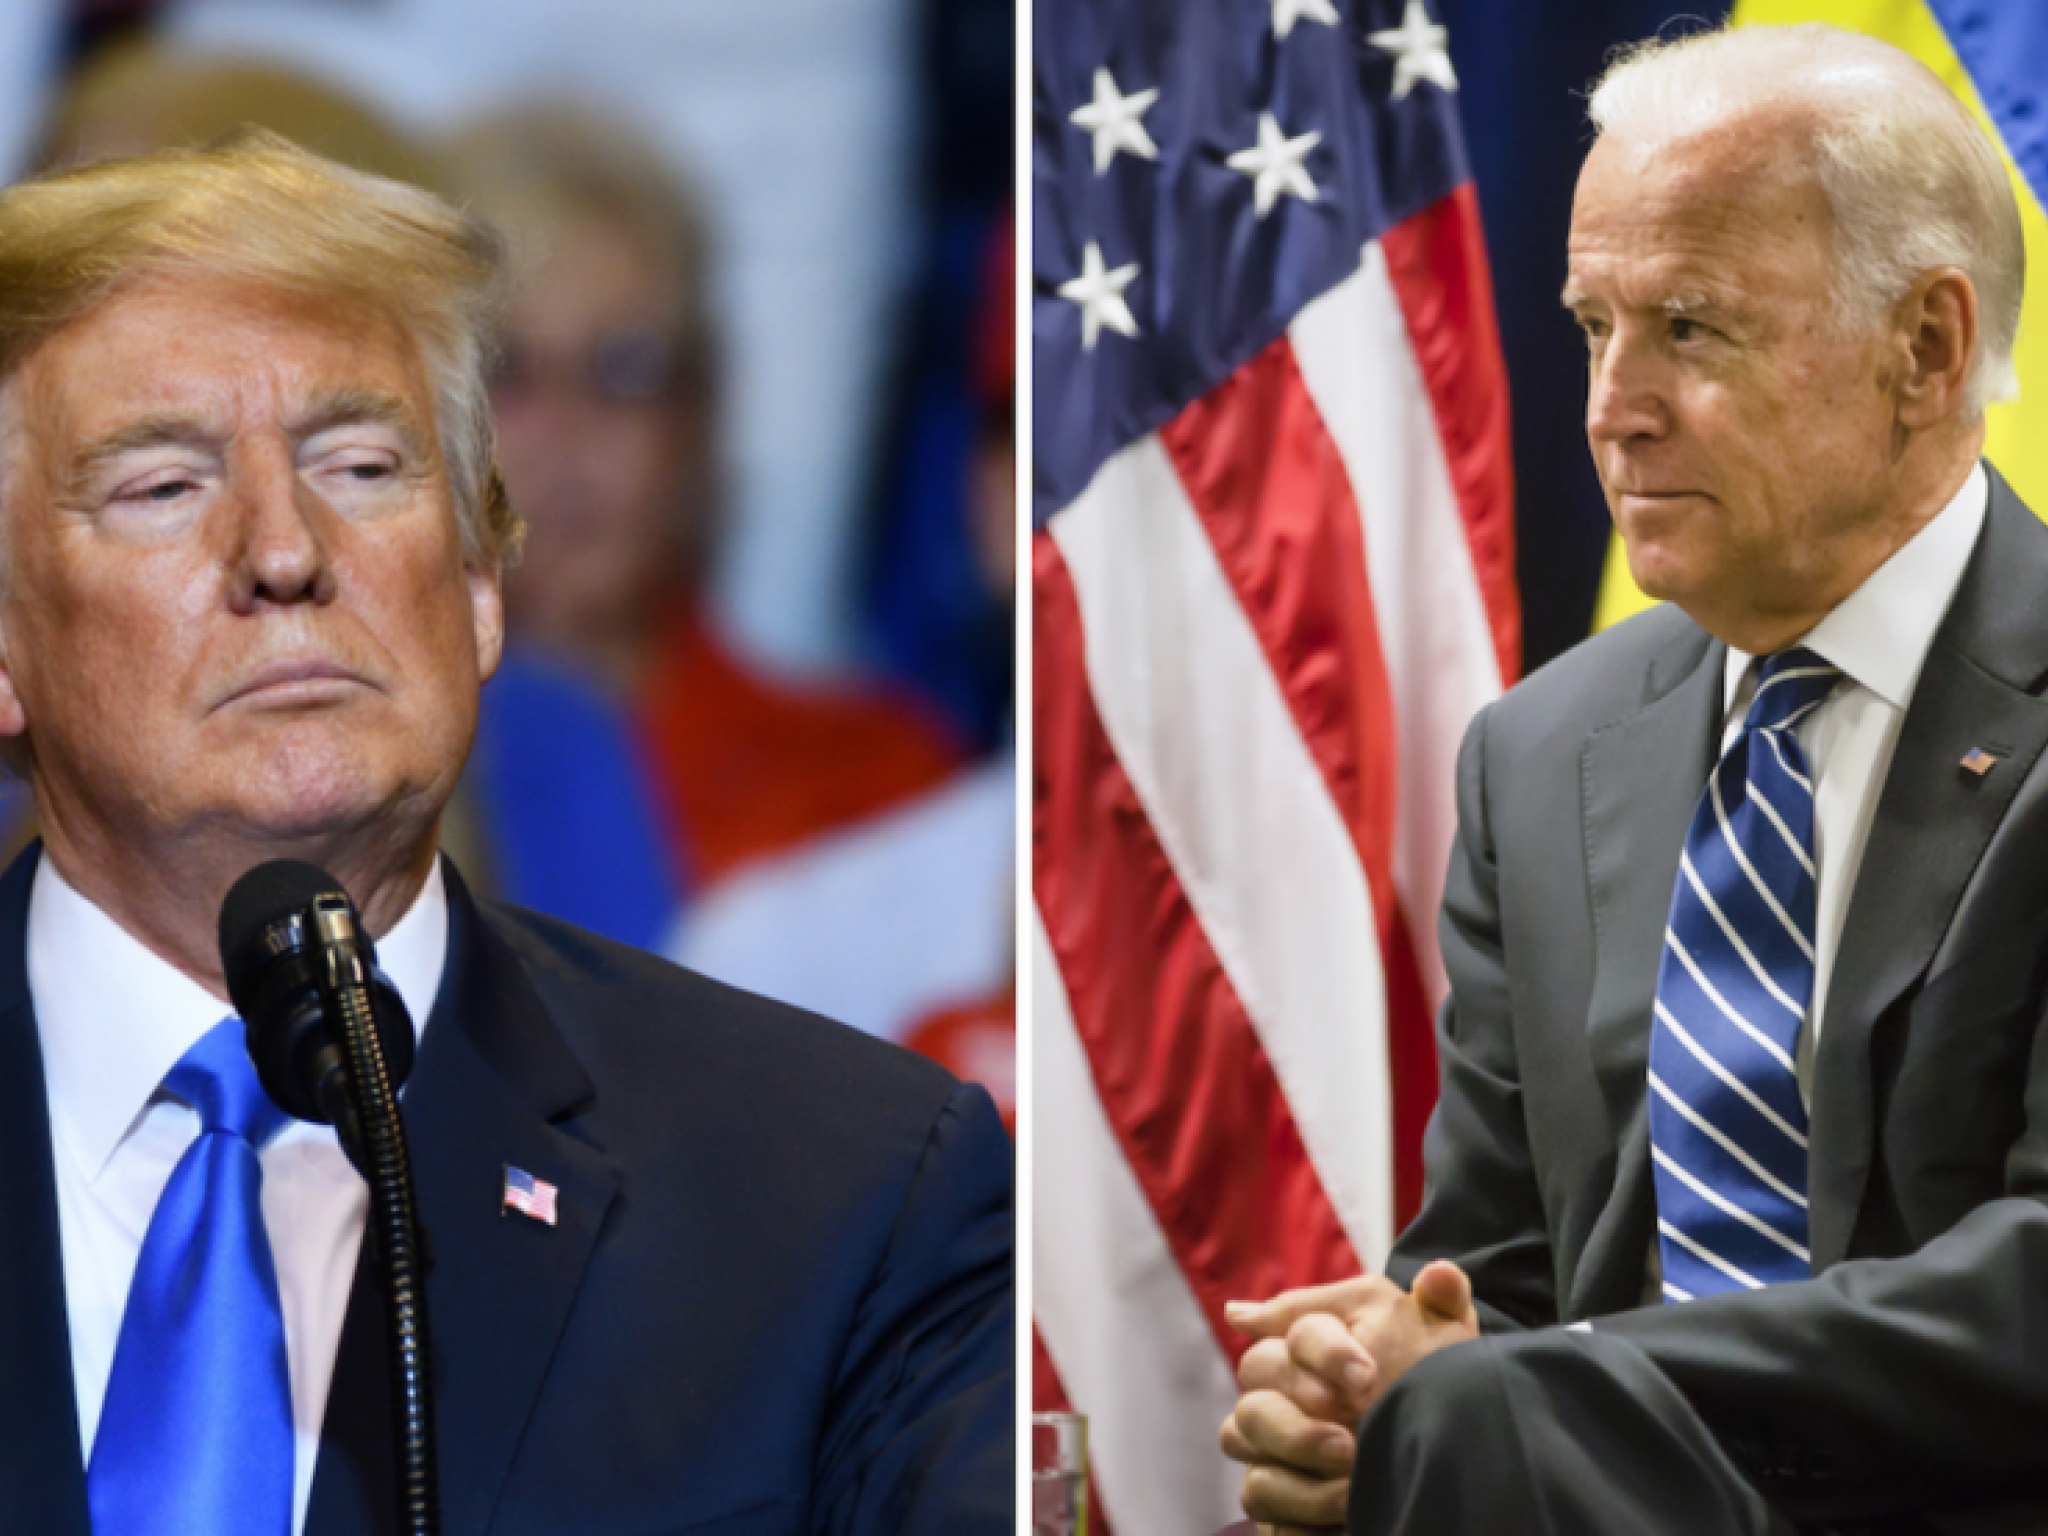  trump-vs-biden-former-presidents-lead-drops-to-1-point-net-buzz-rating-hits-10-month-low-after-guilty-verdict 